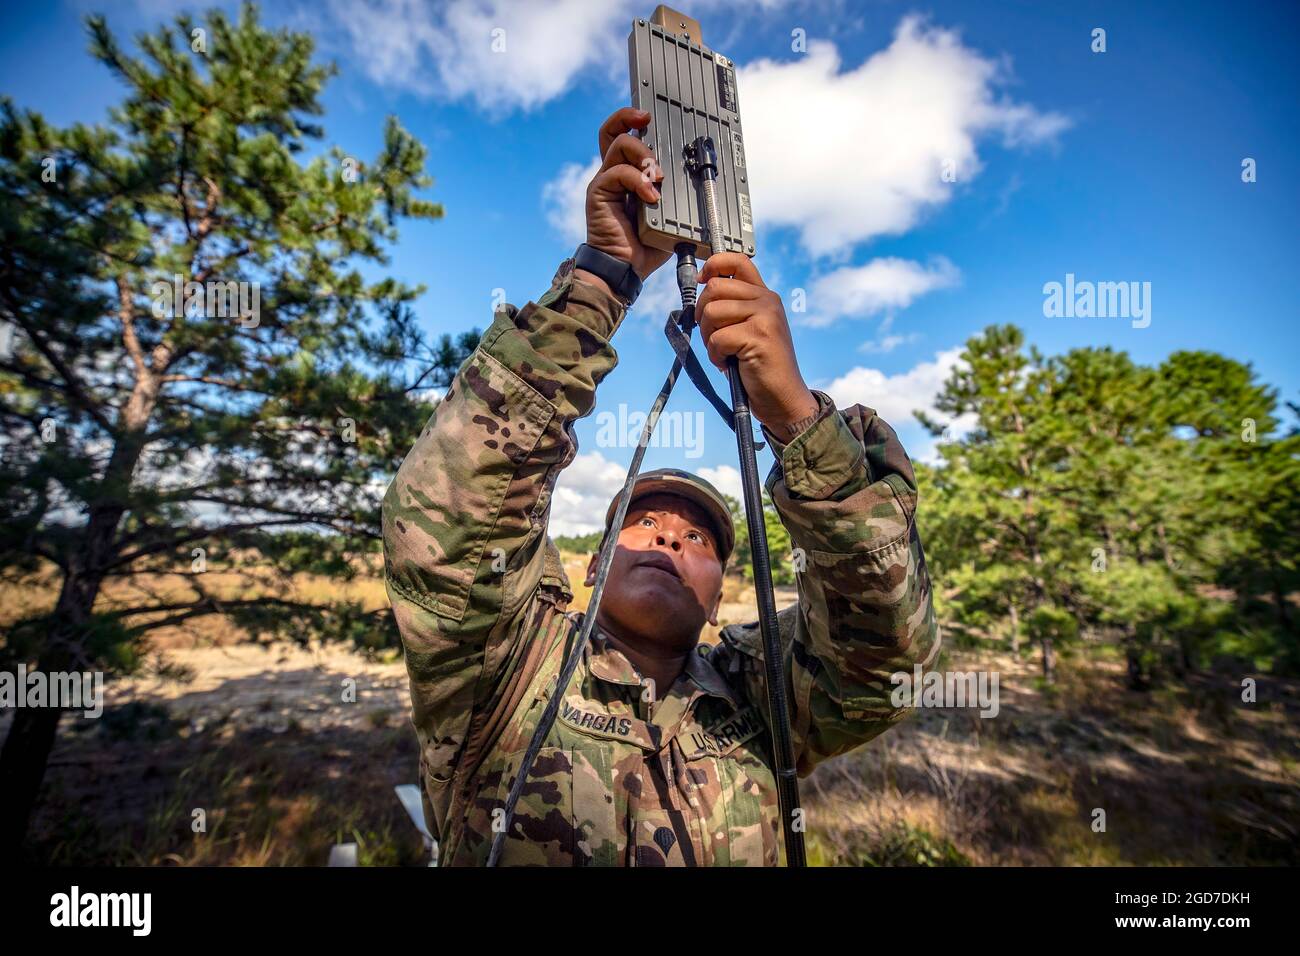 A U.S. Army Soldier sets up an antenna during the field training portion of a RQ-11 Raven B Unmanned Aerial System operator’s course on Joint Base McGuire-Dix-Lakehurst, N.J., Oct. 10, 2018. The course was held by the New Jersey Army National Guard’s 254th Regional Training Institute, which is based out of Sea Girt, N.J. (U.S. Air National Guard photo by Master Sgt. Matt Hecht) Stock Photo